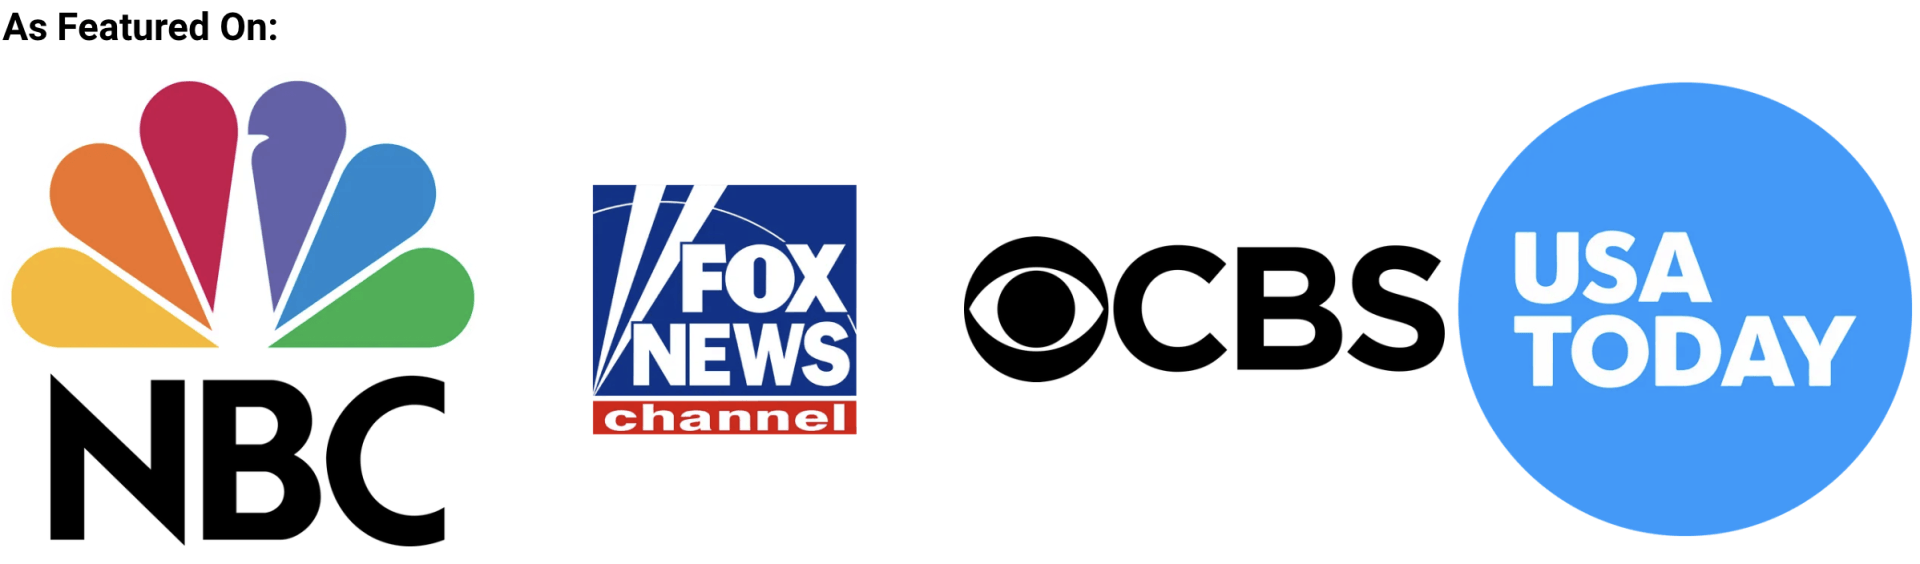 Logos for nbc fox news and usa today are shown